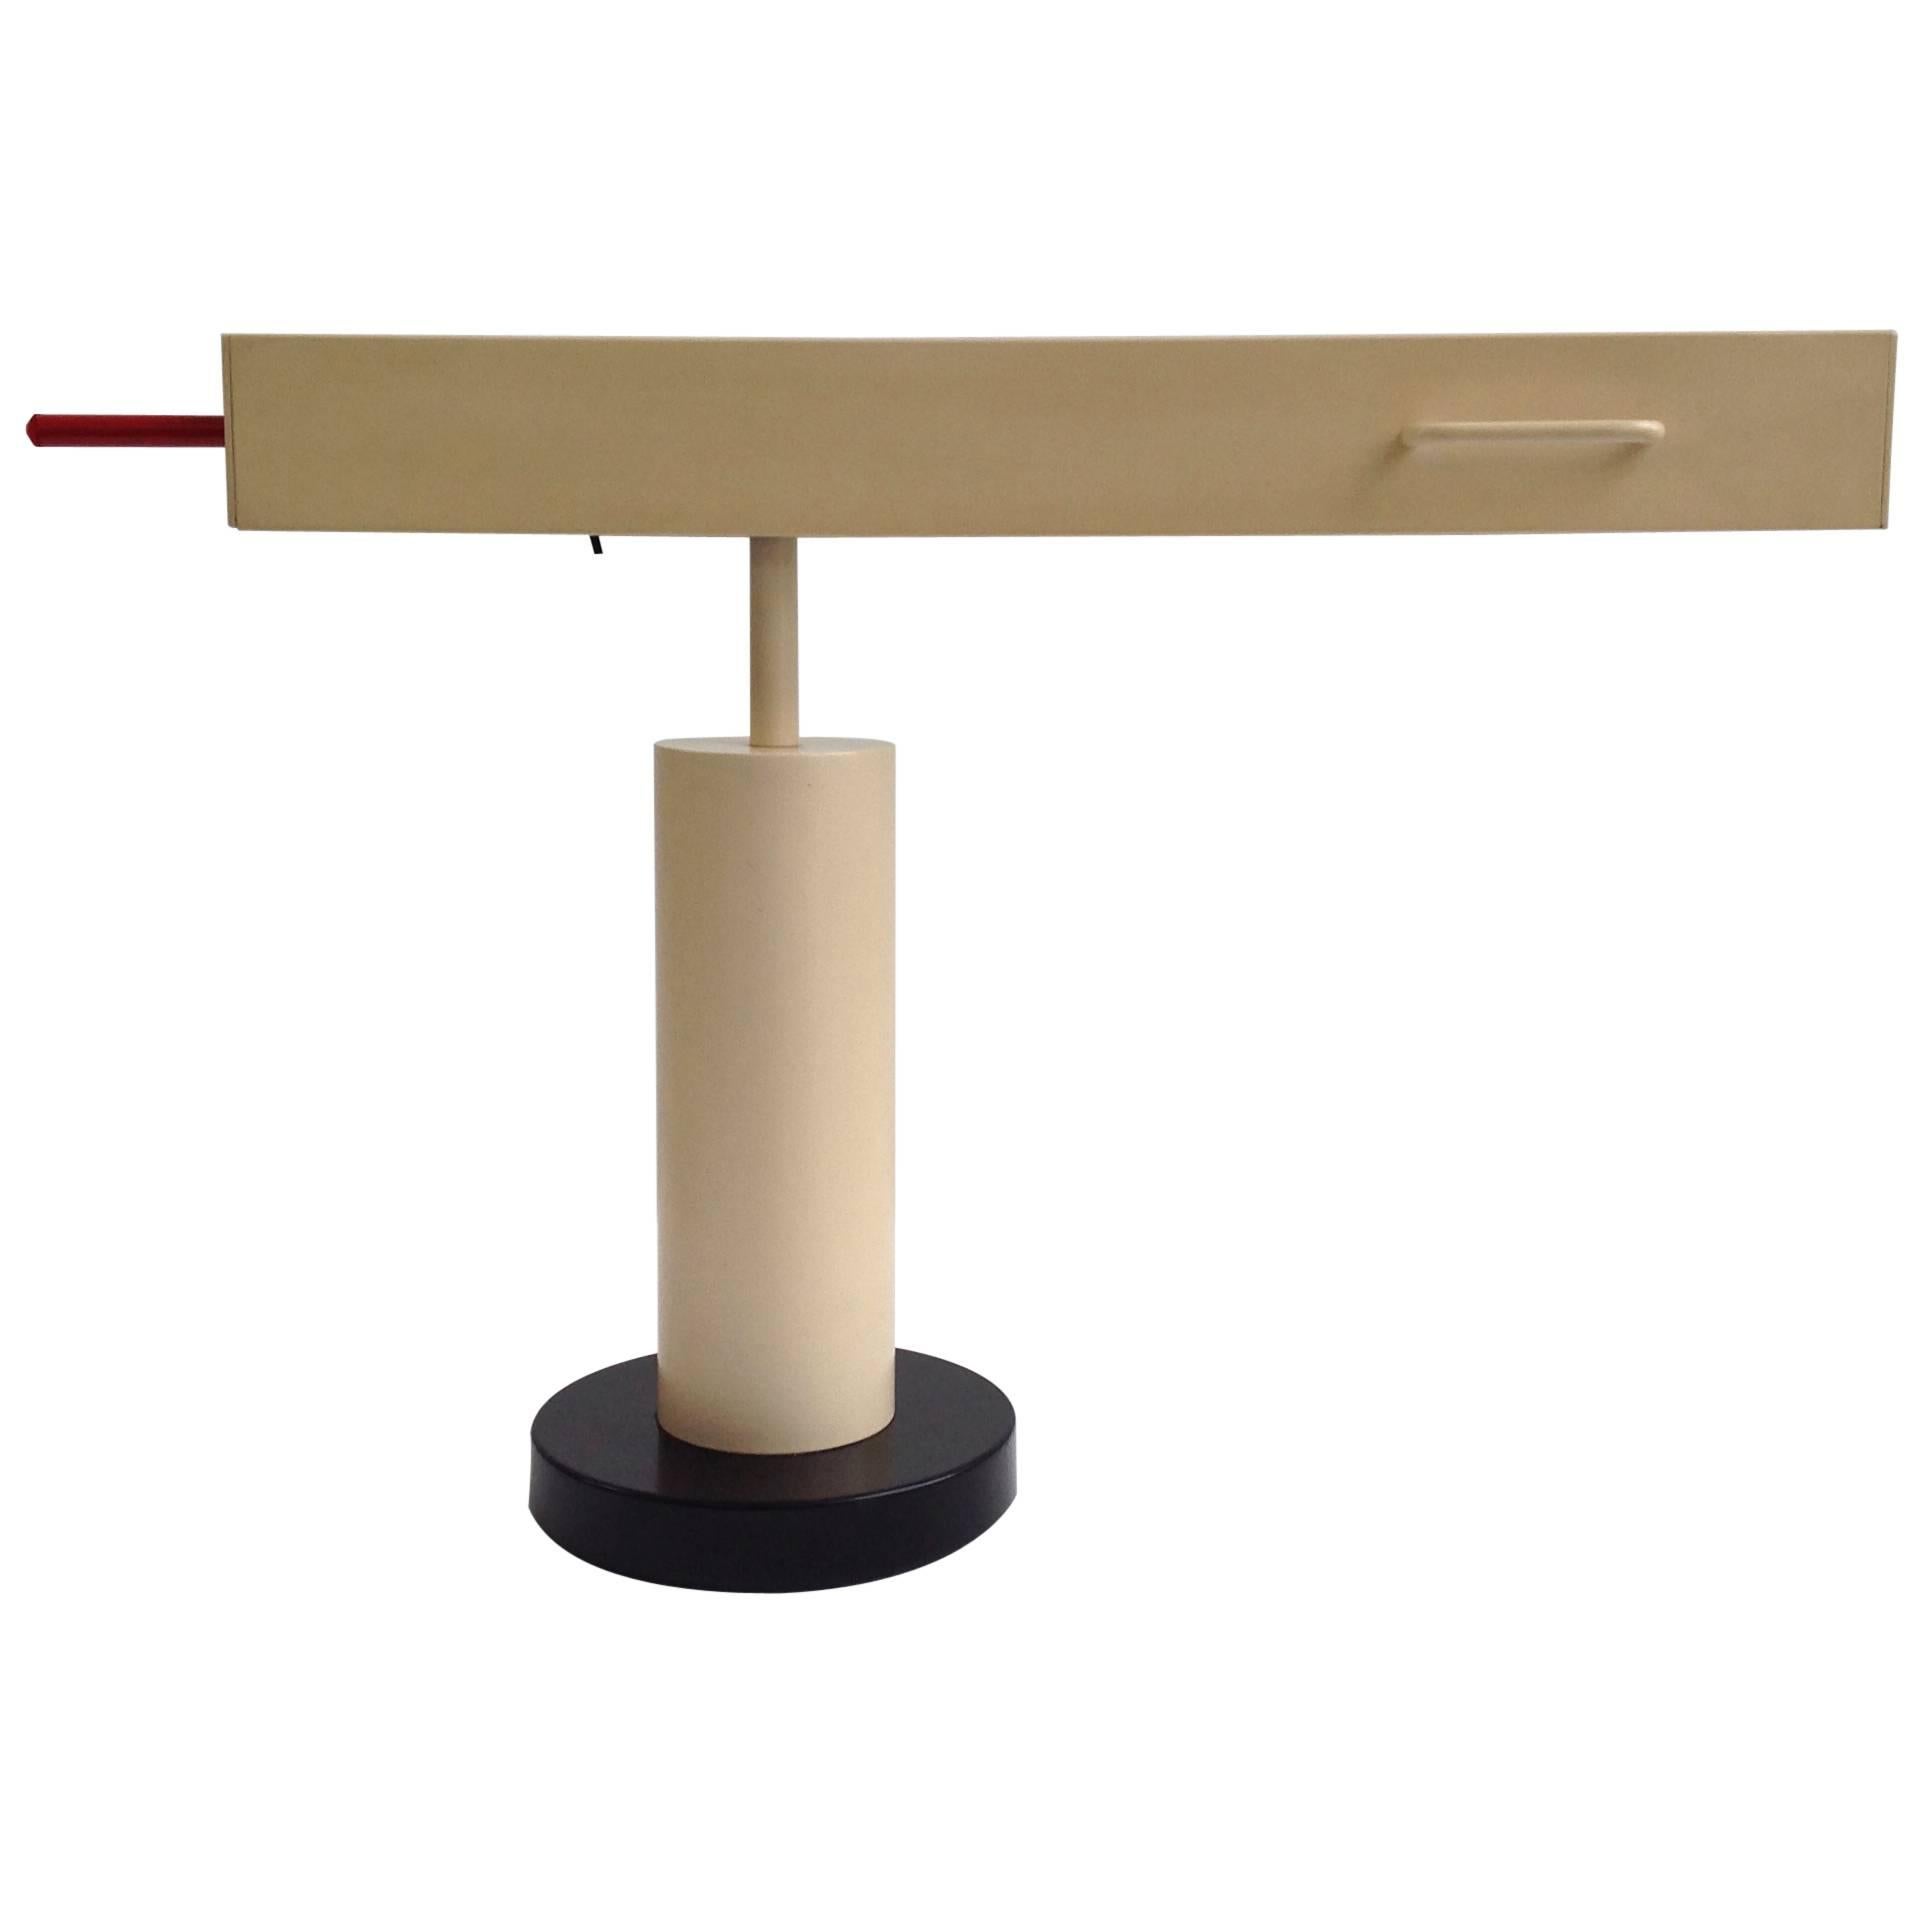 Extremely Rare Desk Lamp Design by Ettore Sottsass, Made in Small Quantity For Sale